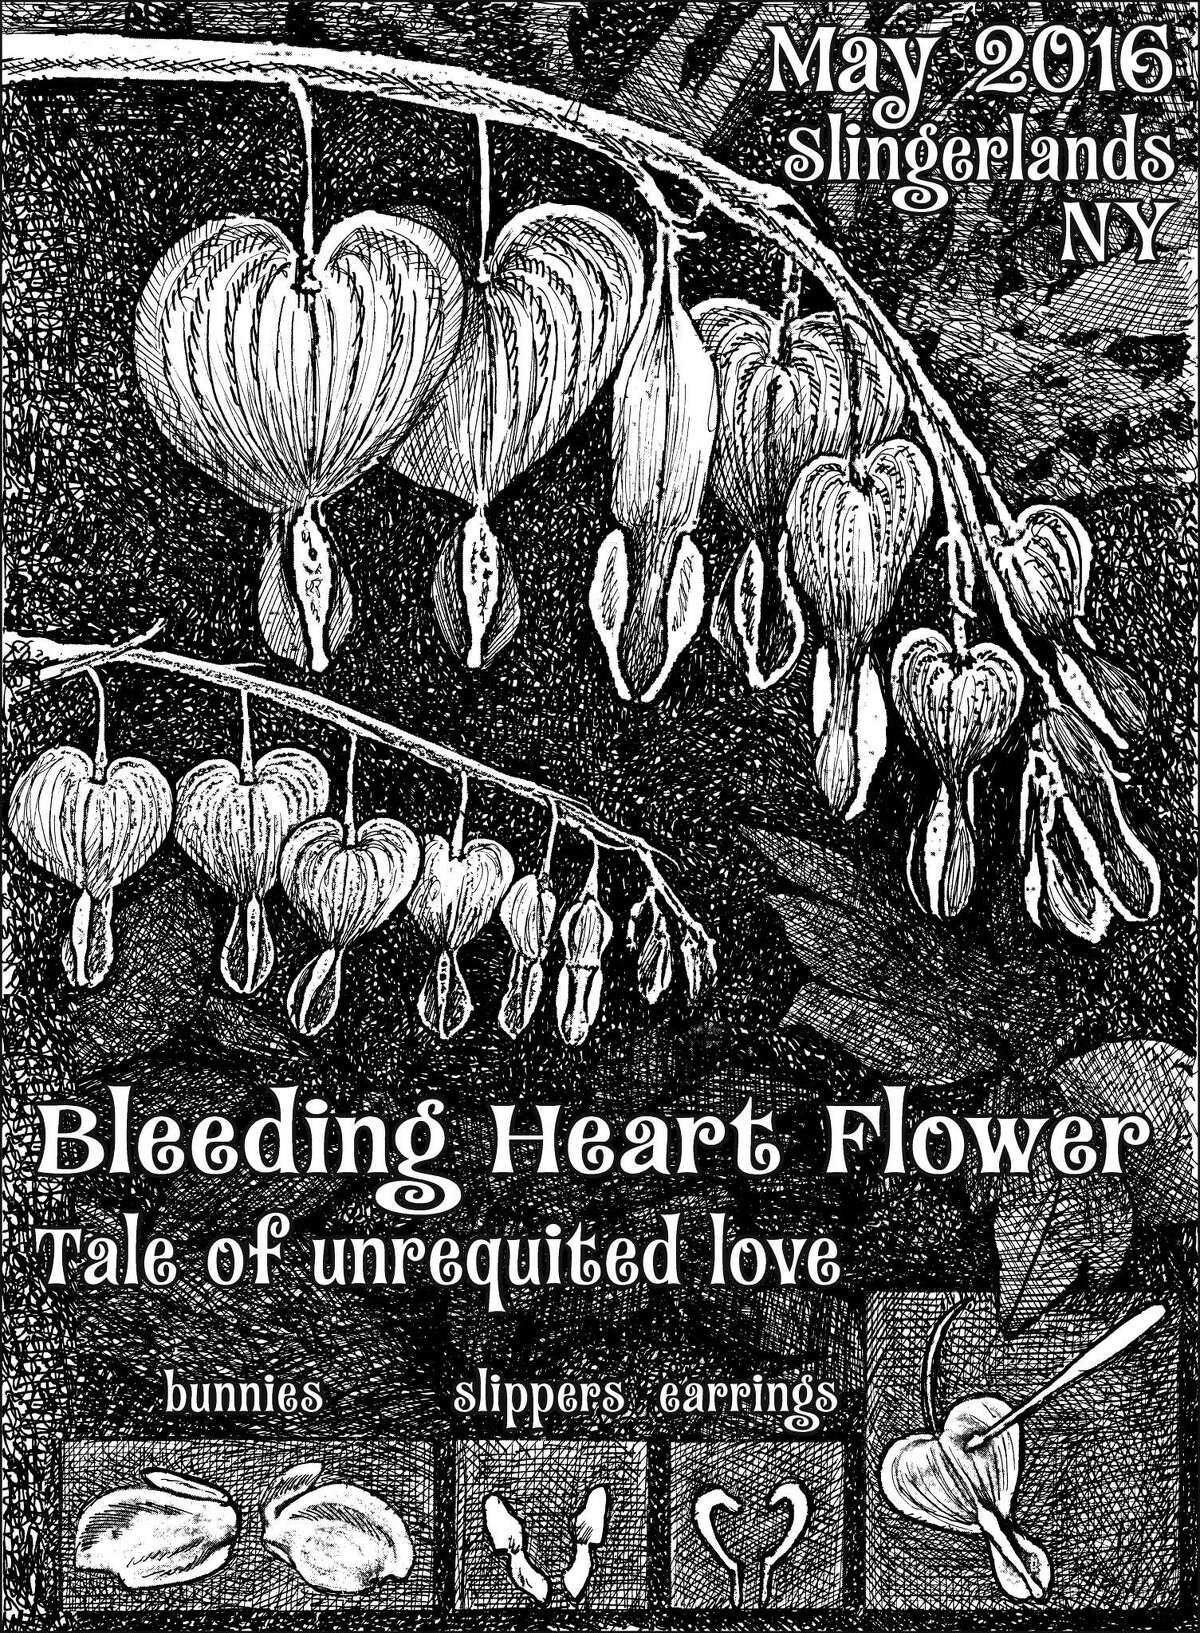 Folkloric legends were once used to explain the unique features of flora. Bleeding hearts are associated with tragic stories of unrequited love, told centuries ago, often while delicately peeling apart one of the plant's red-pink-white heart-shaped flowers, using each piece as a prop. (Carol Coogan)